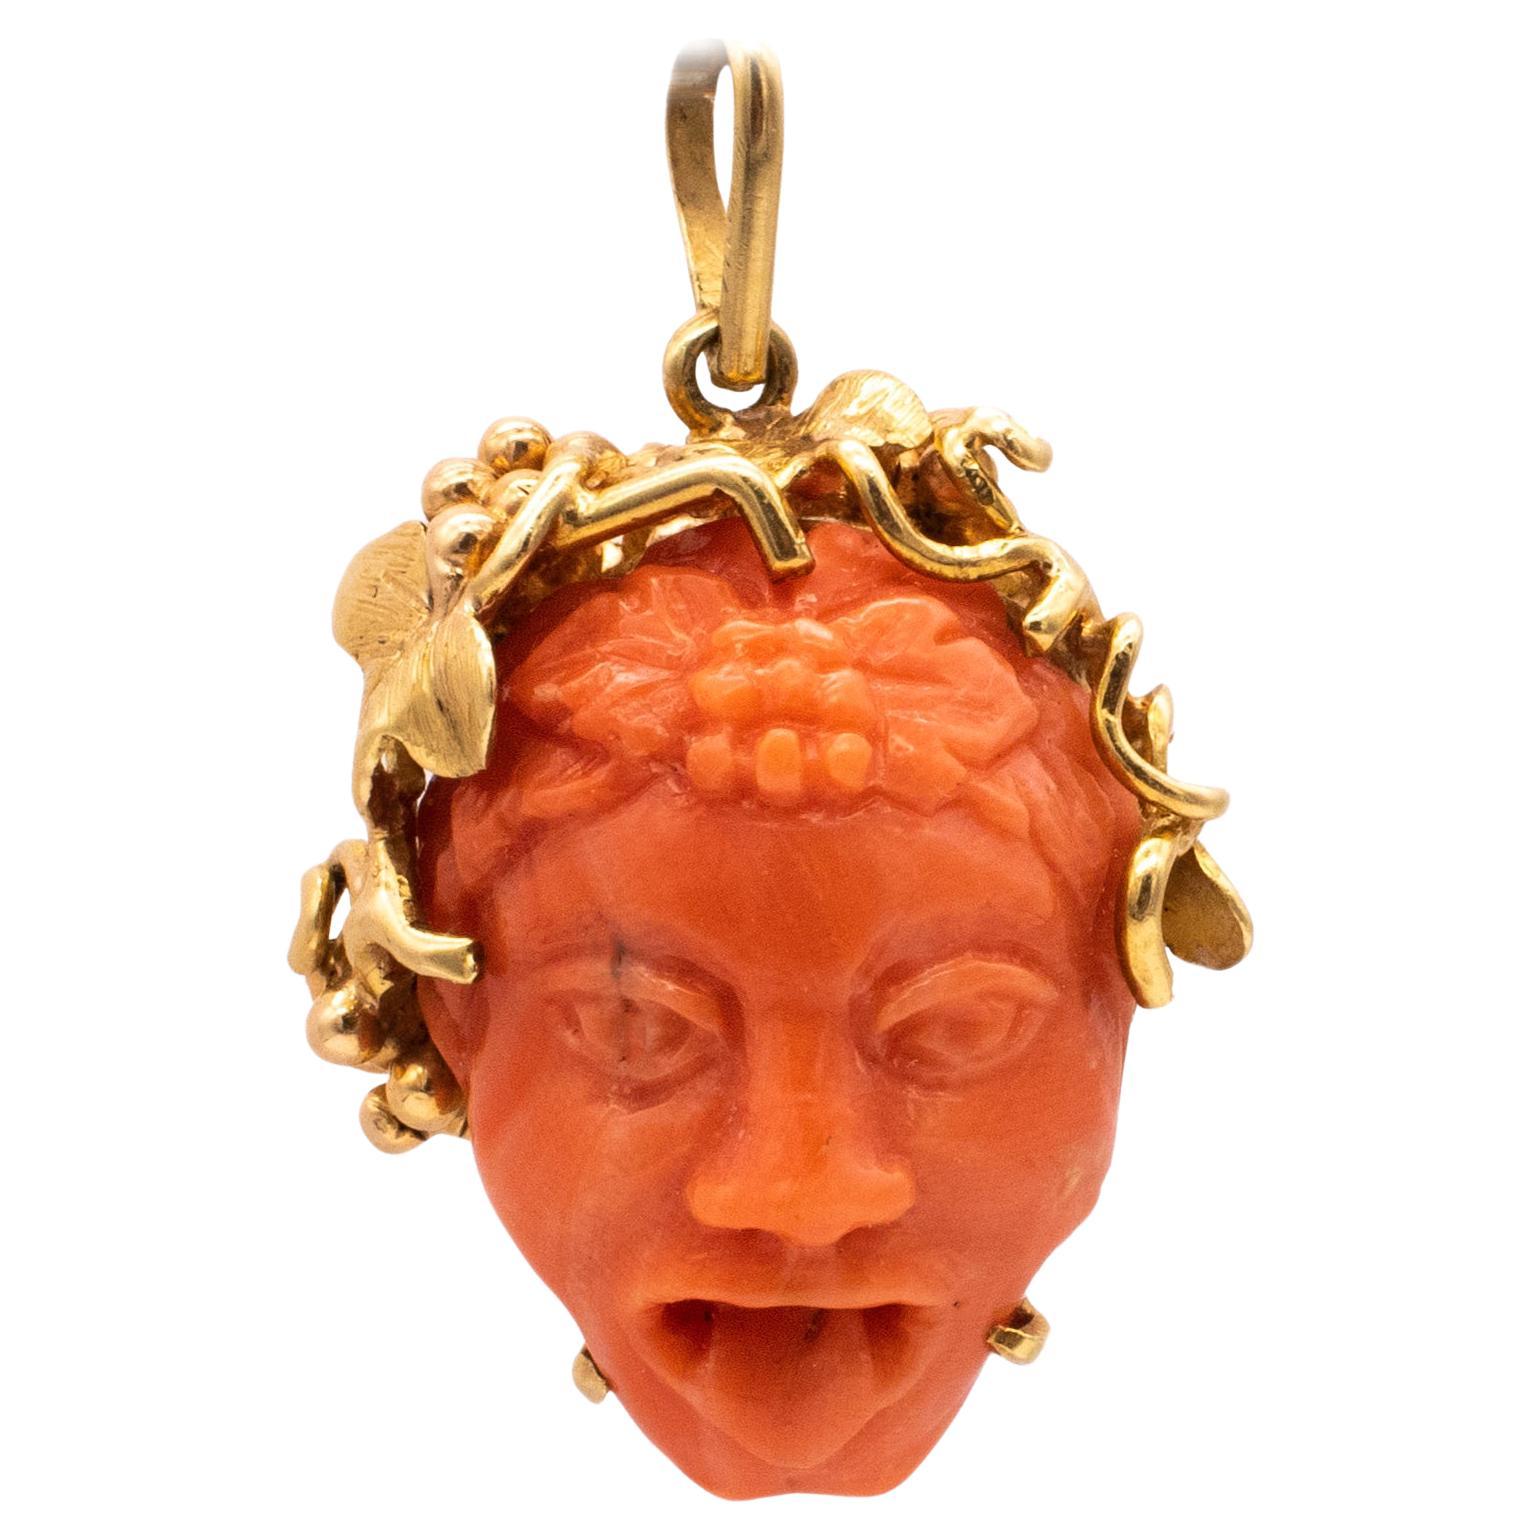 Spritzer and Fuhrmann 18Kt Gold Pendant with Bacchus Head Carved in Coral